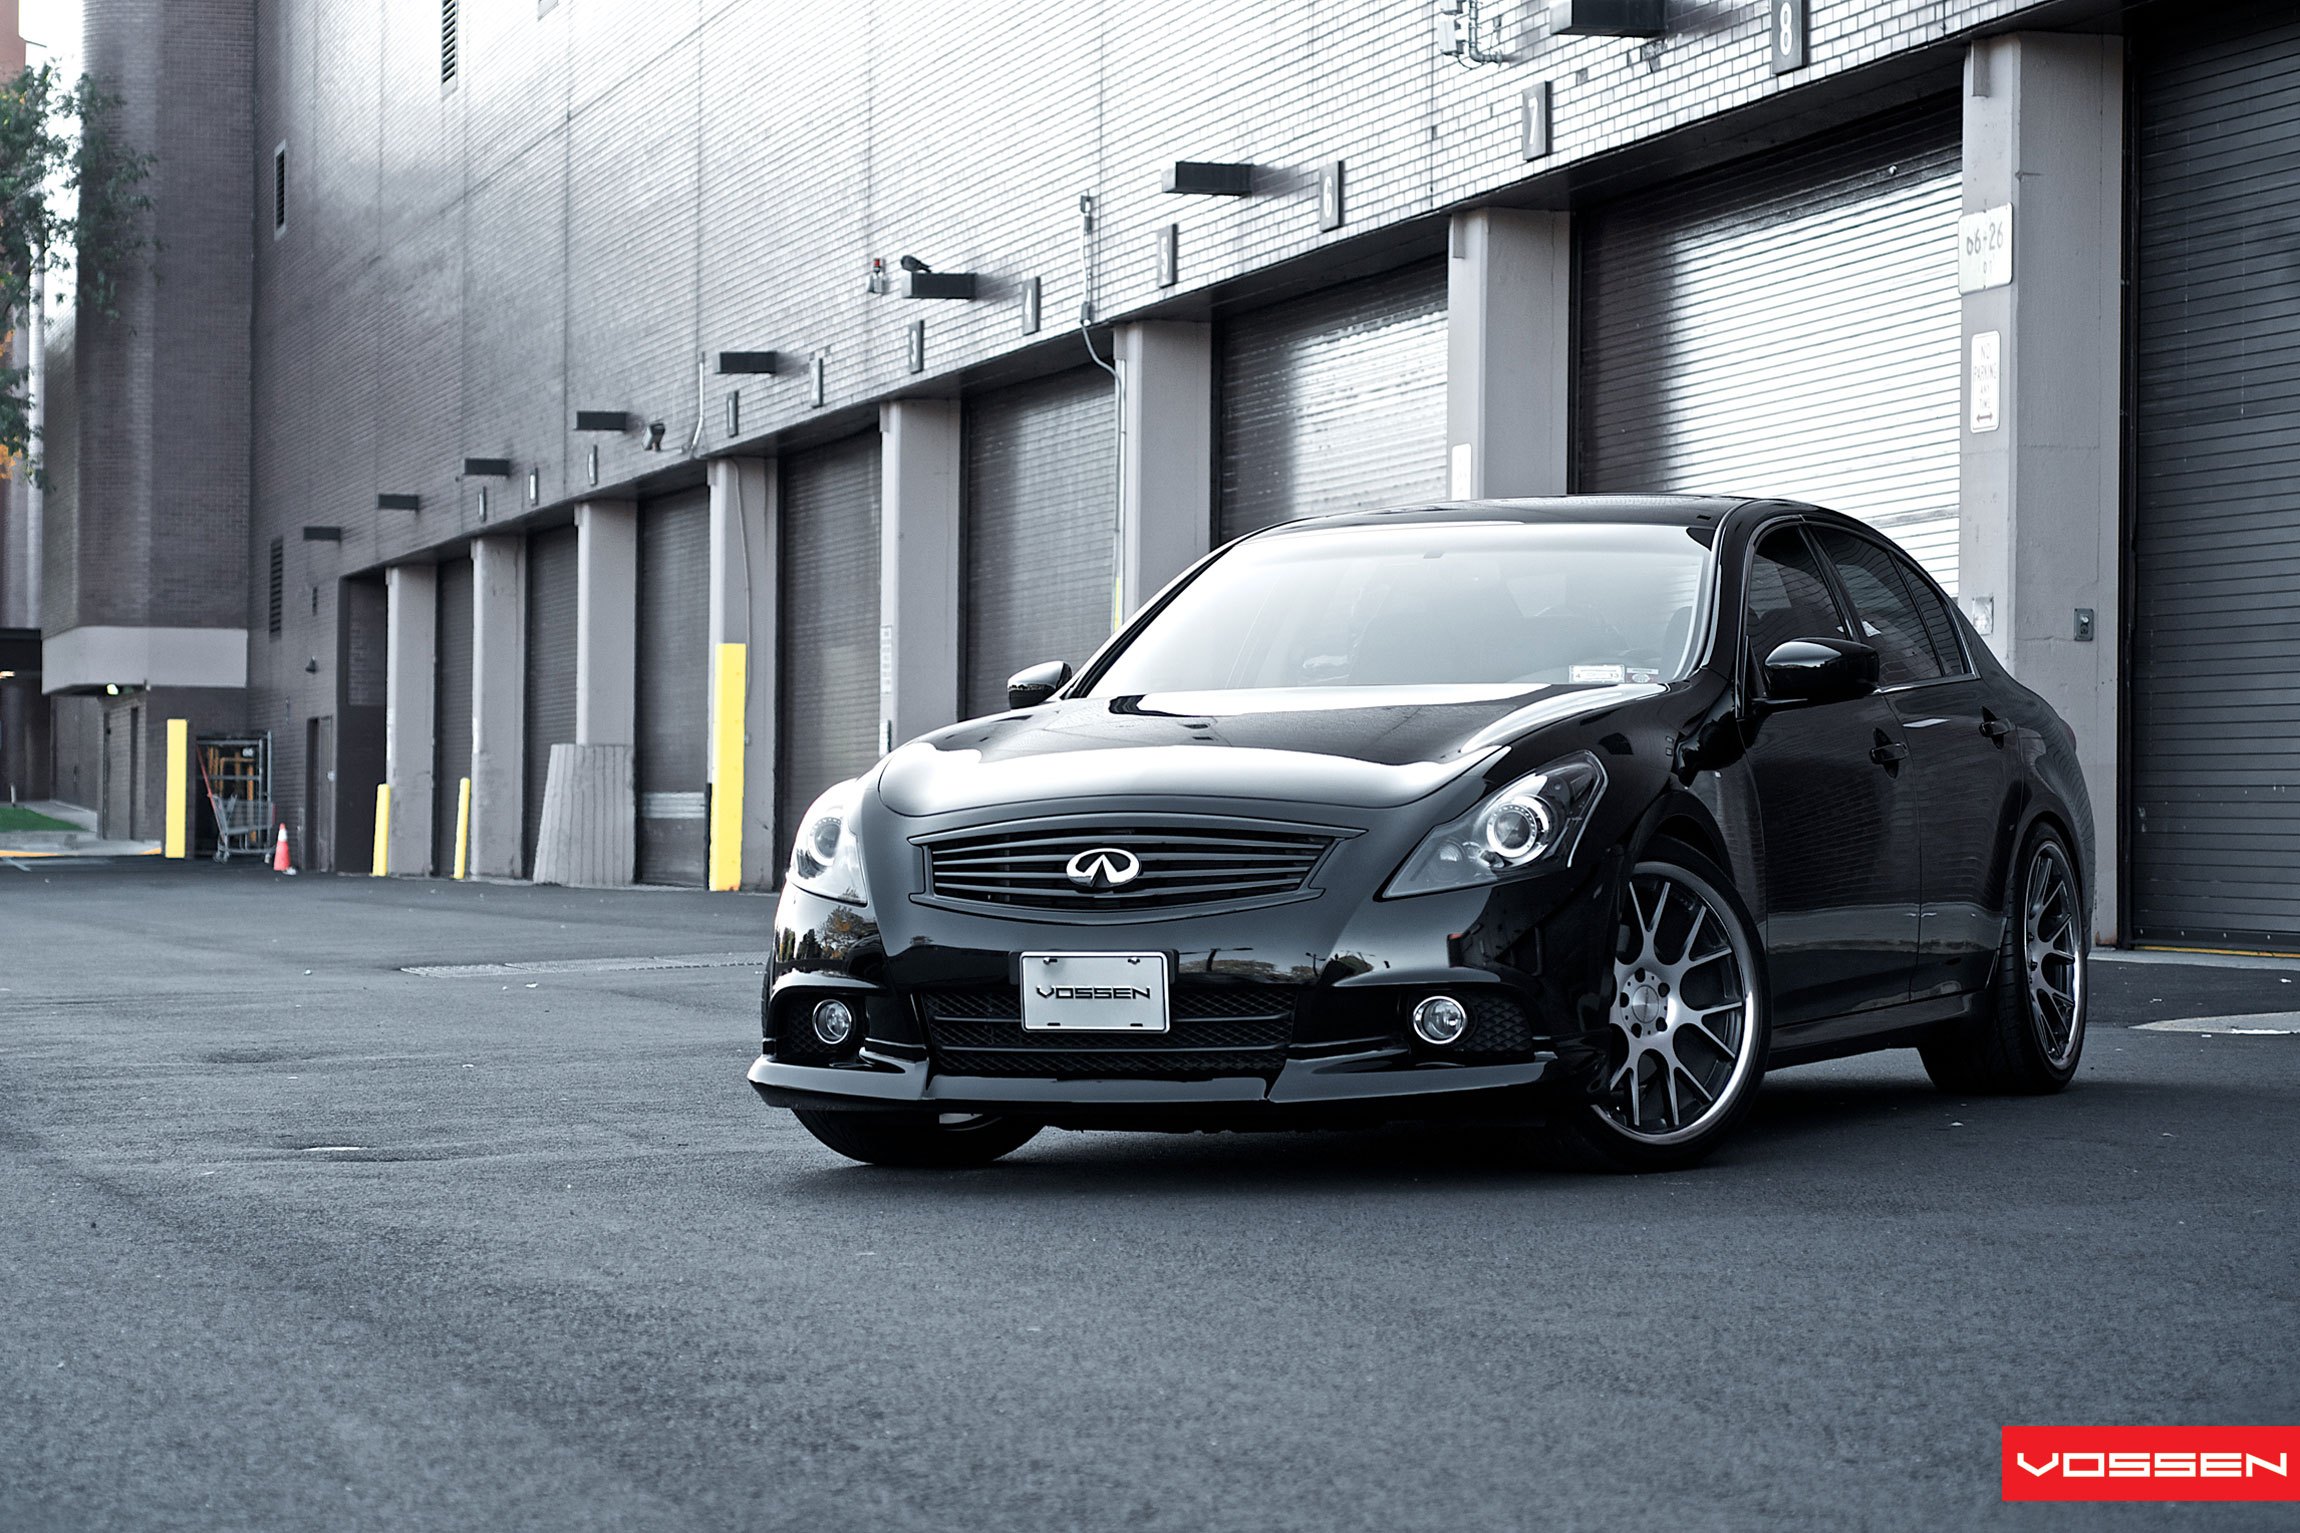 Aftermarket Front Bumper Cover on Black Infiniti G37 - Photo by Vossen